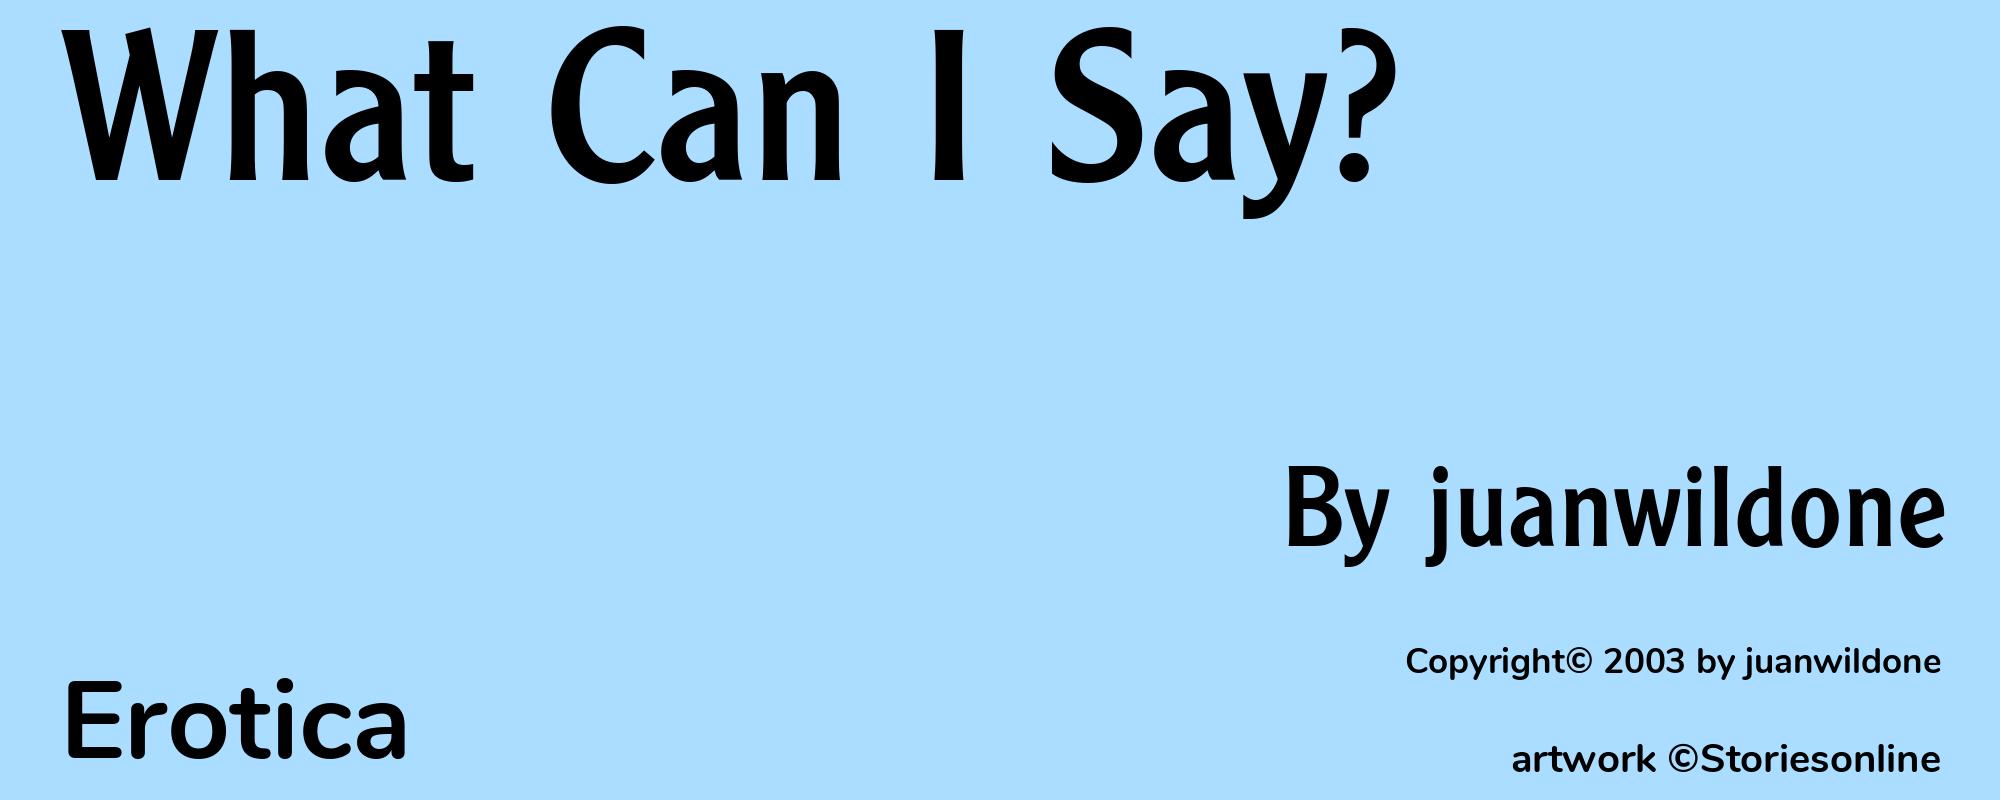 What Can I Say? - Cover